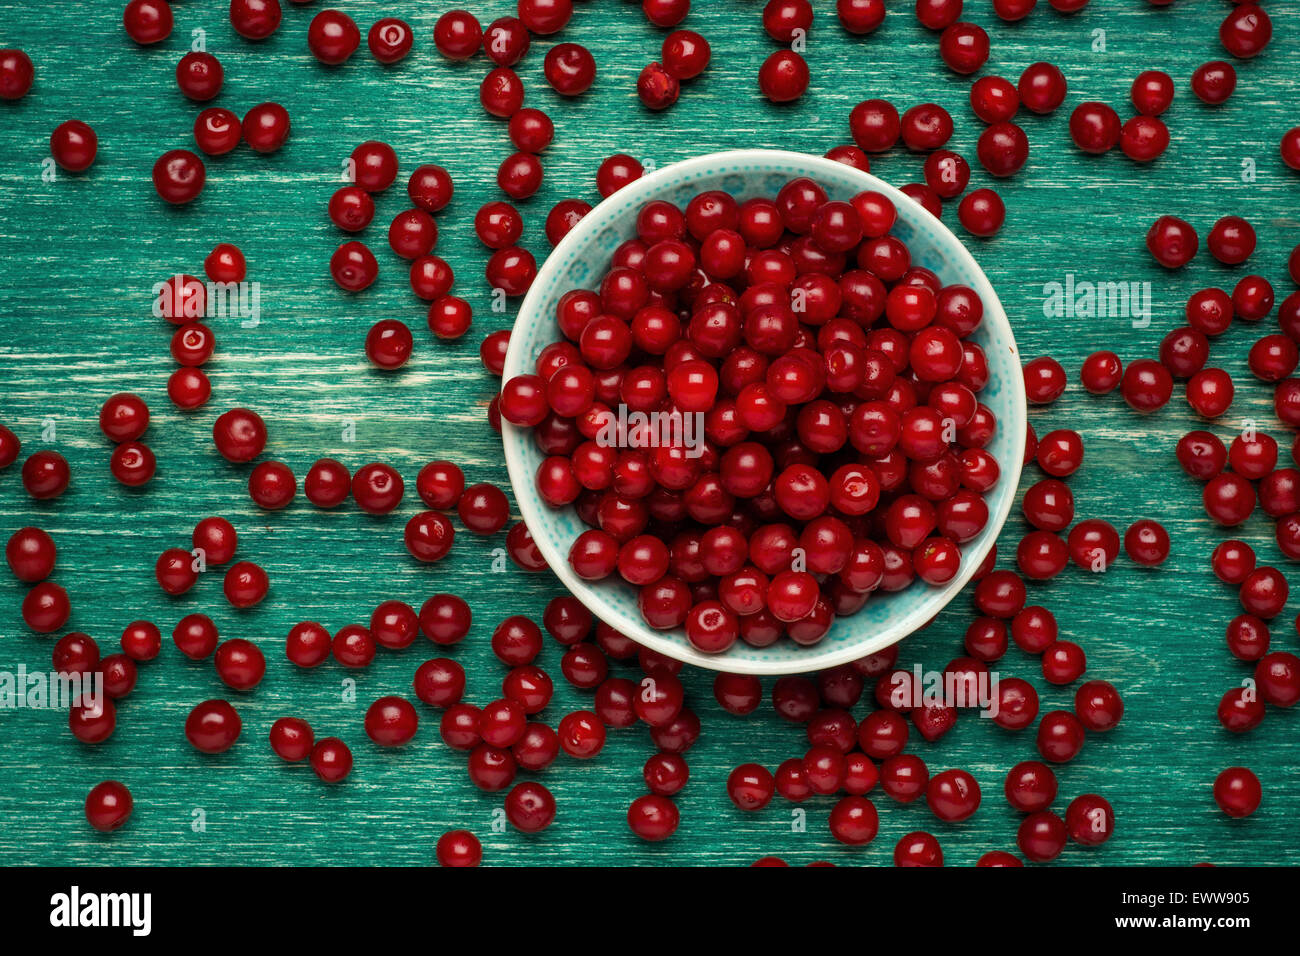 Ripe cherry in a vintage bowl on wooden background Stock Photo